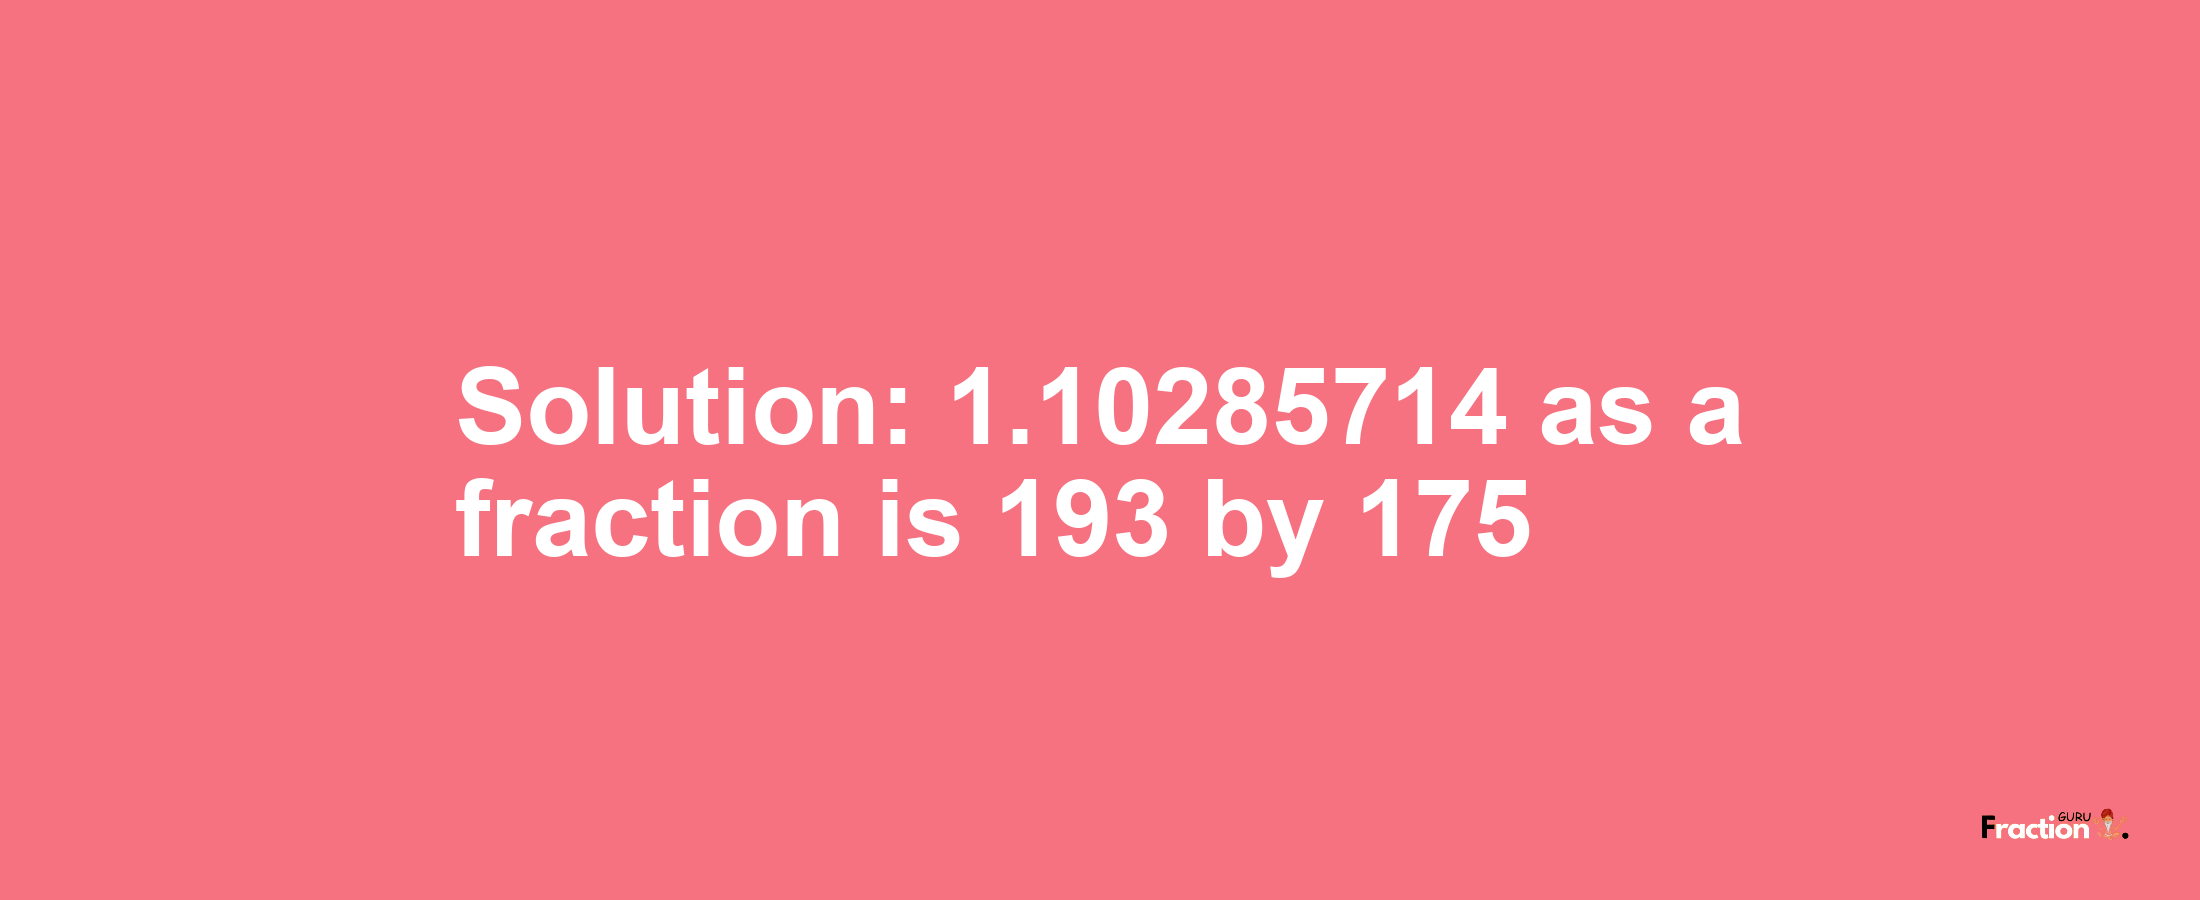 Solution:1.10285714 as a fraction is 193/175